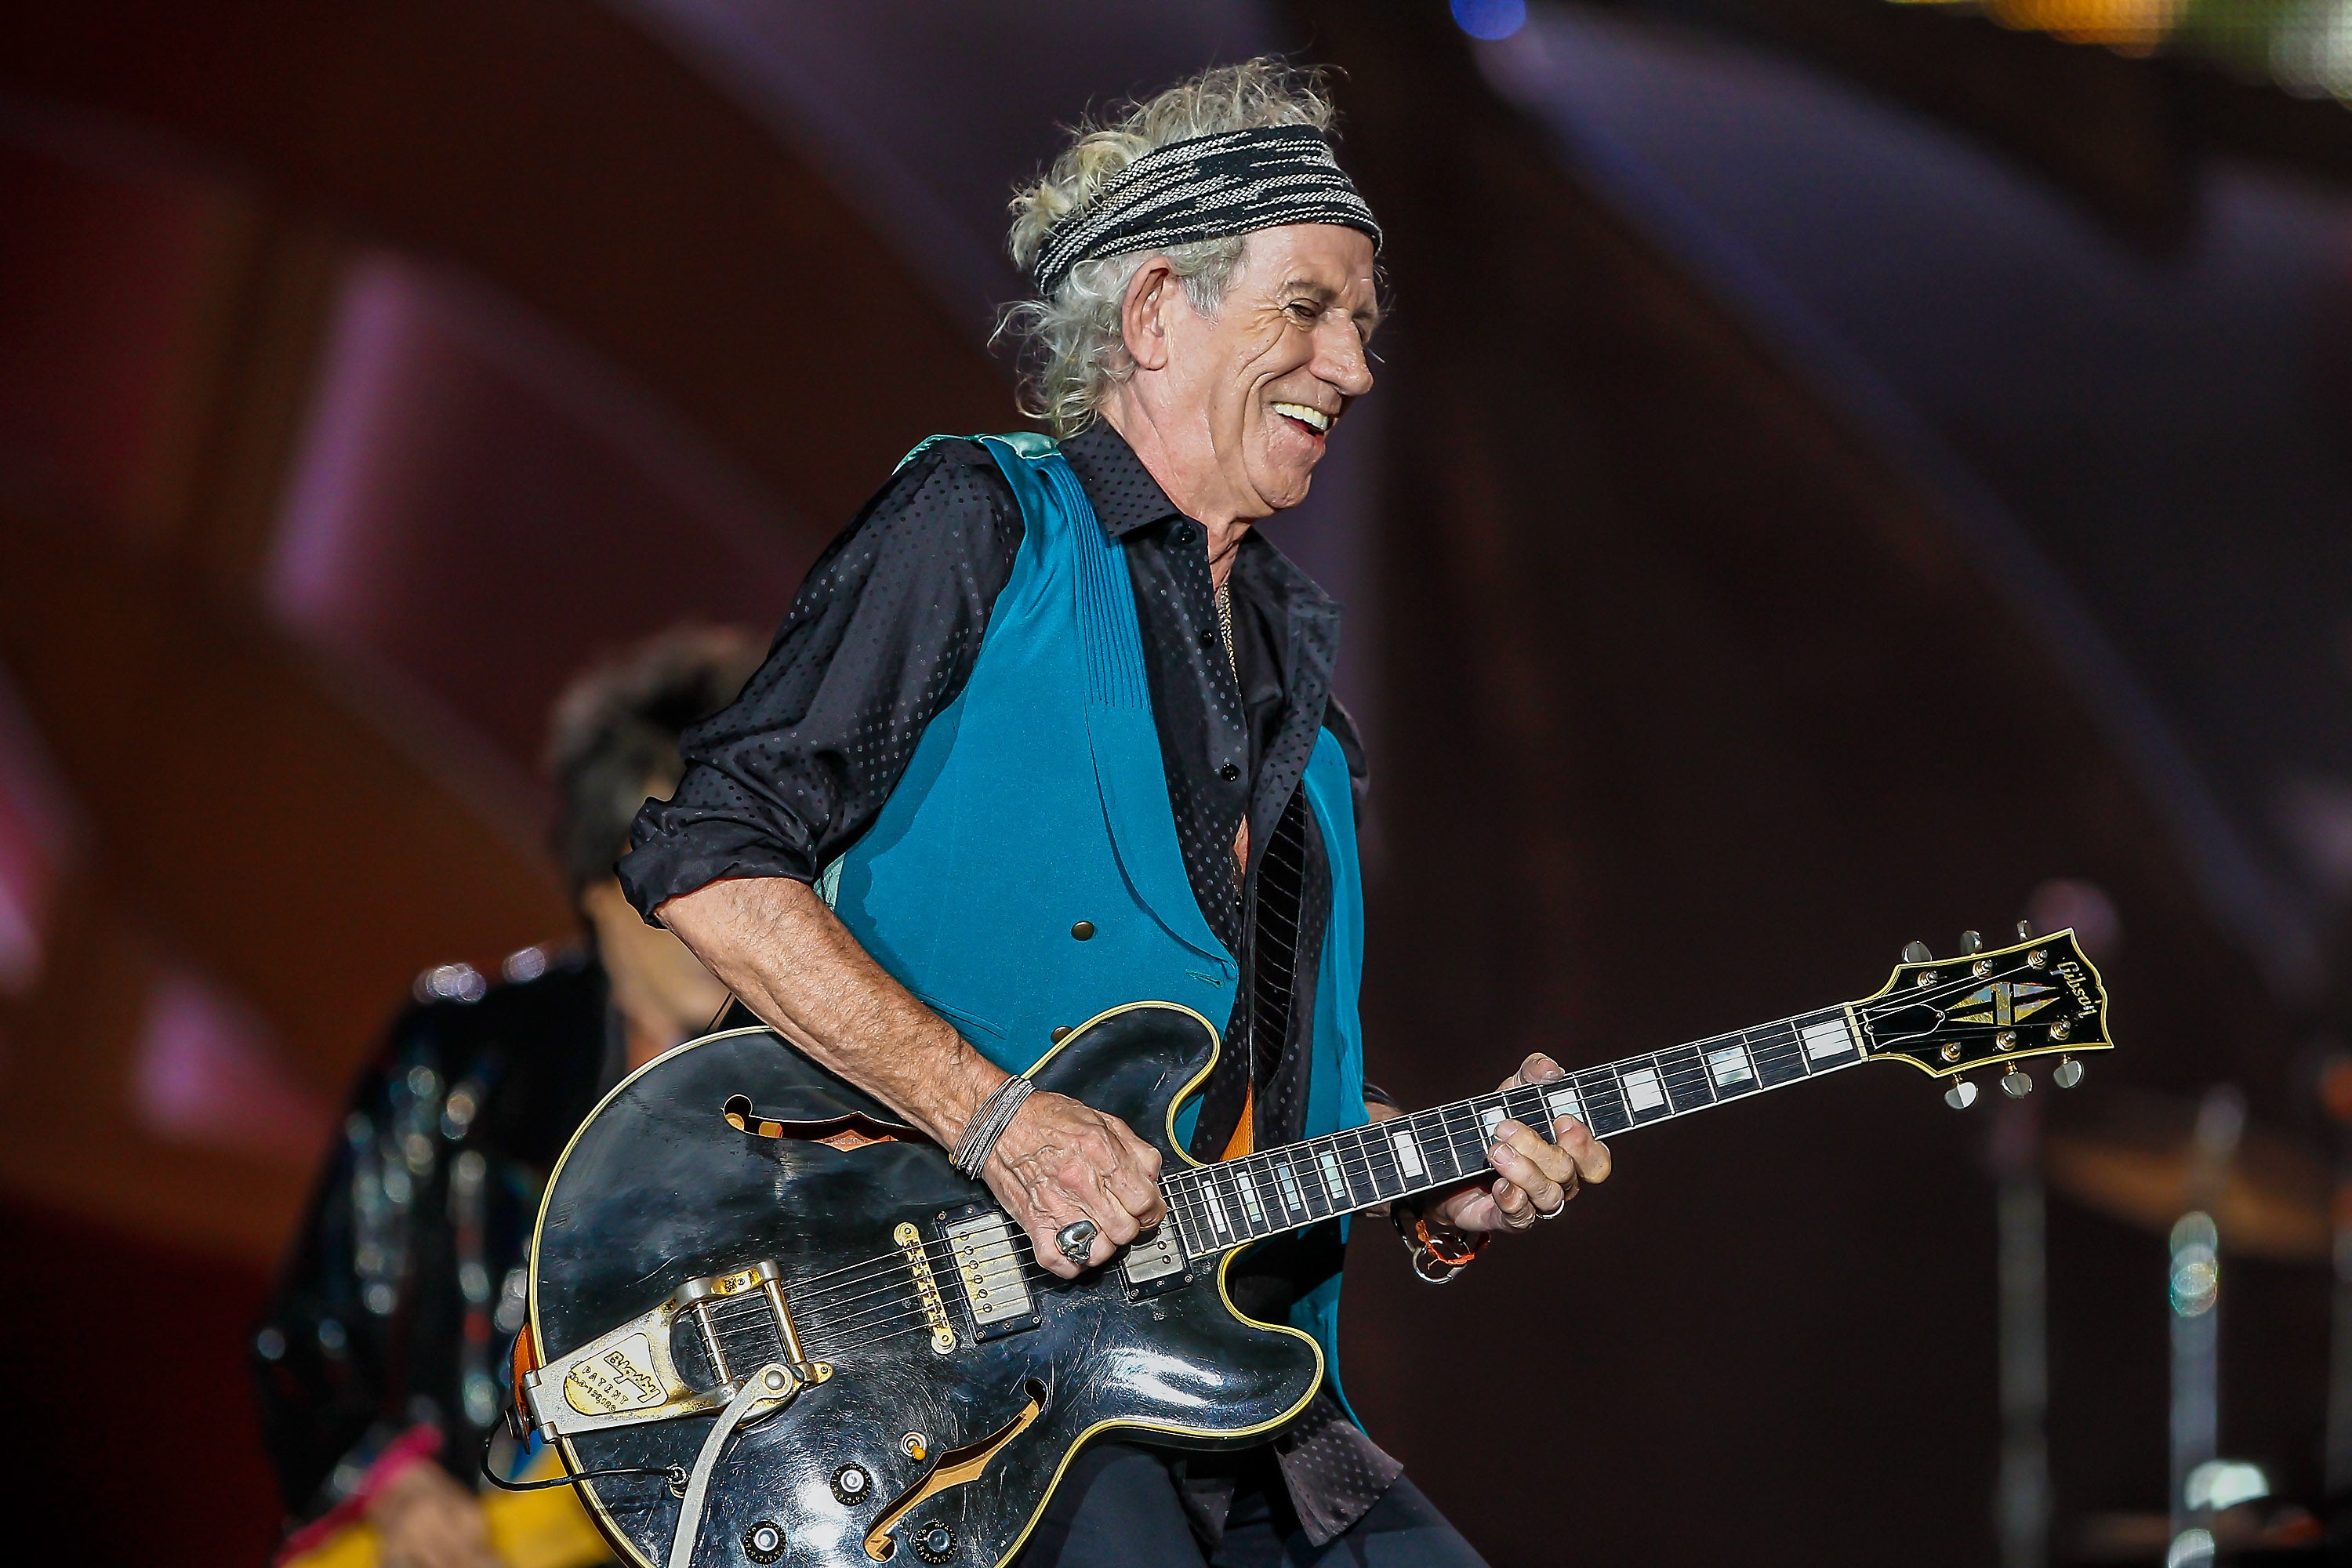 Keith Richards, Rolling Stone